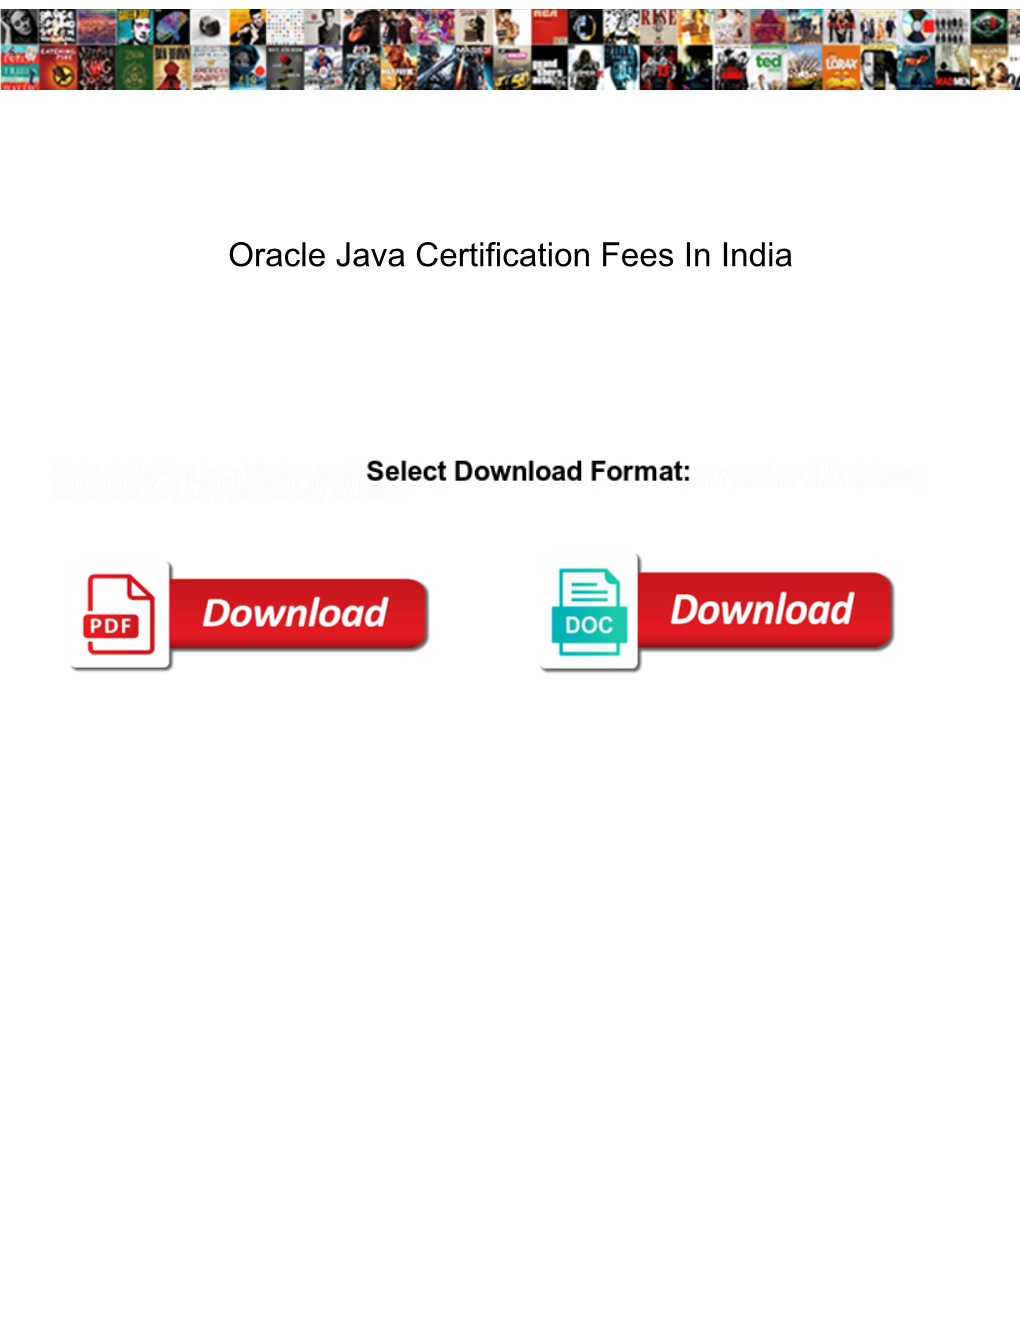 Oracle Java Certification Fees in India